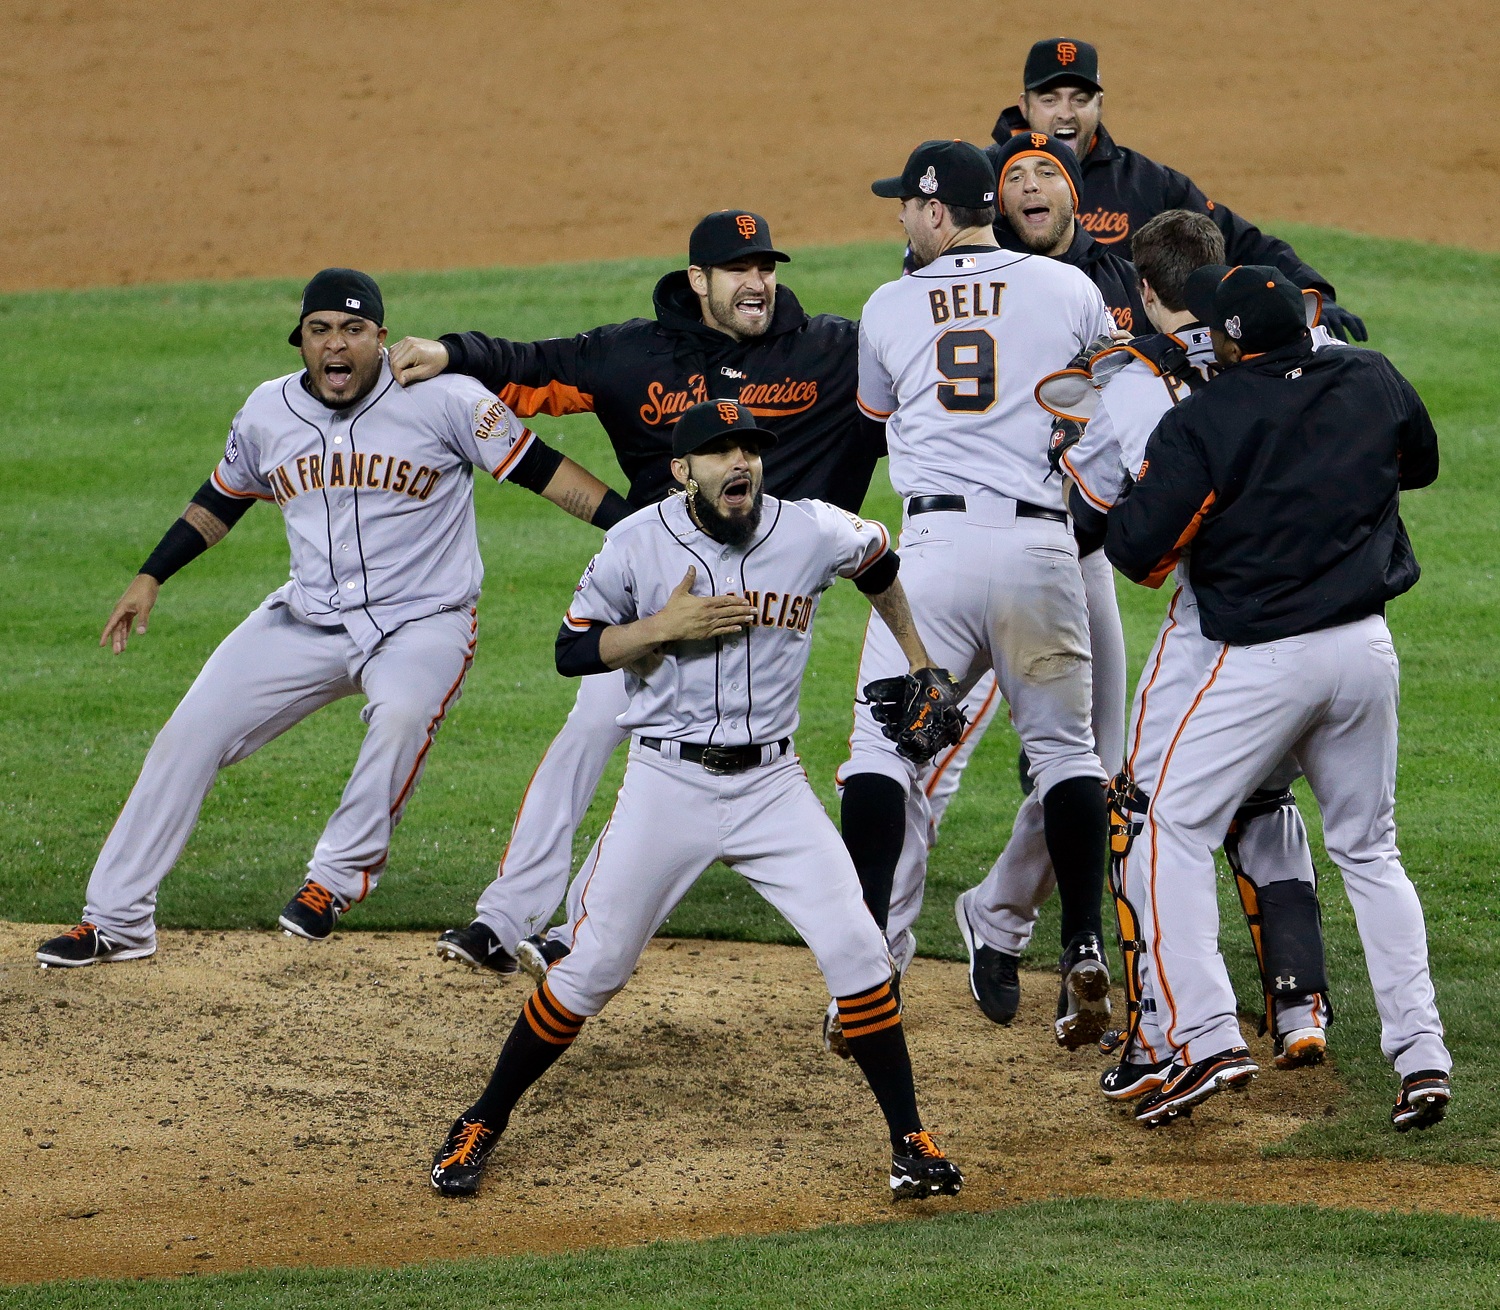 Giants sweep Tigers for World Series title